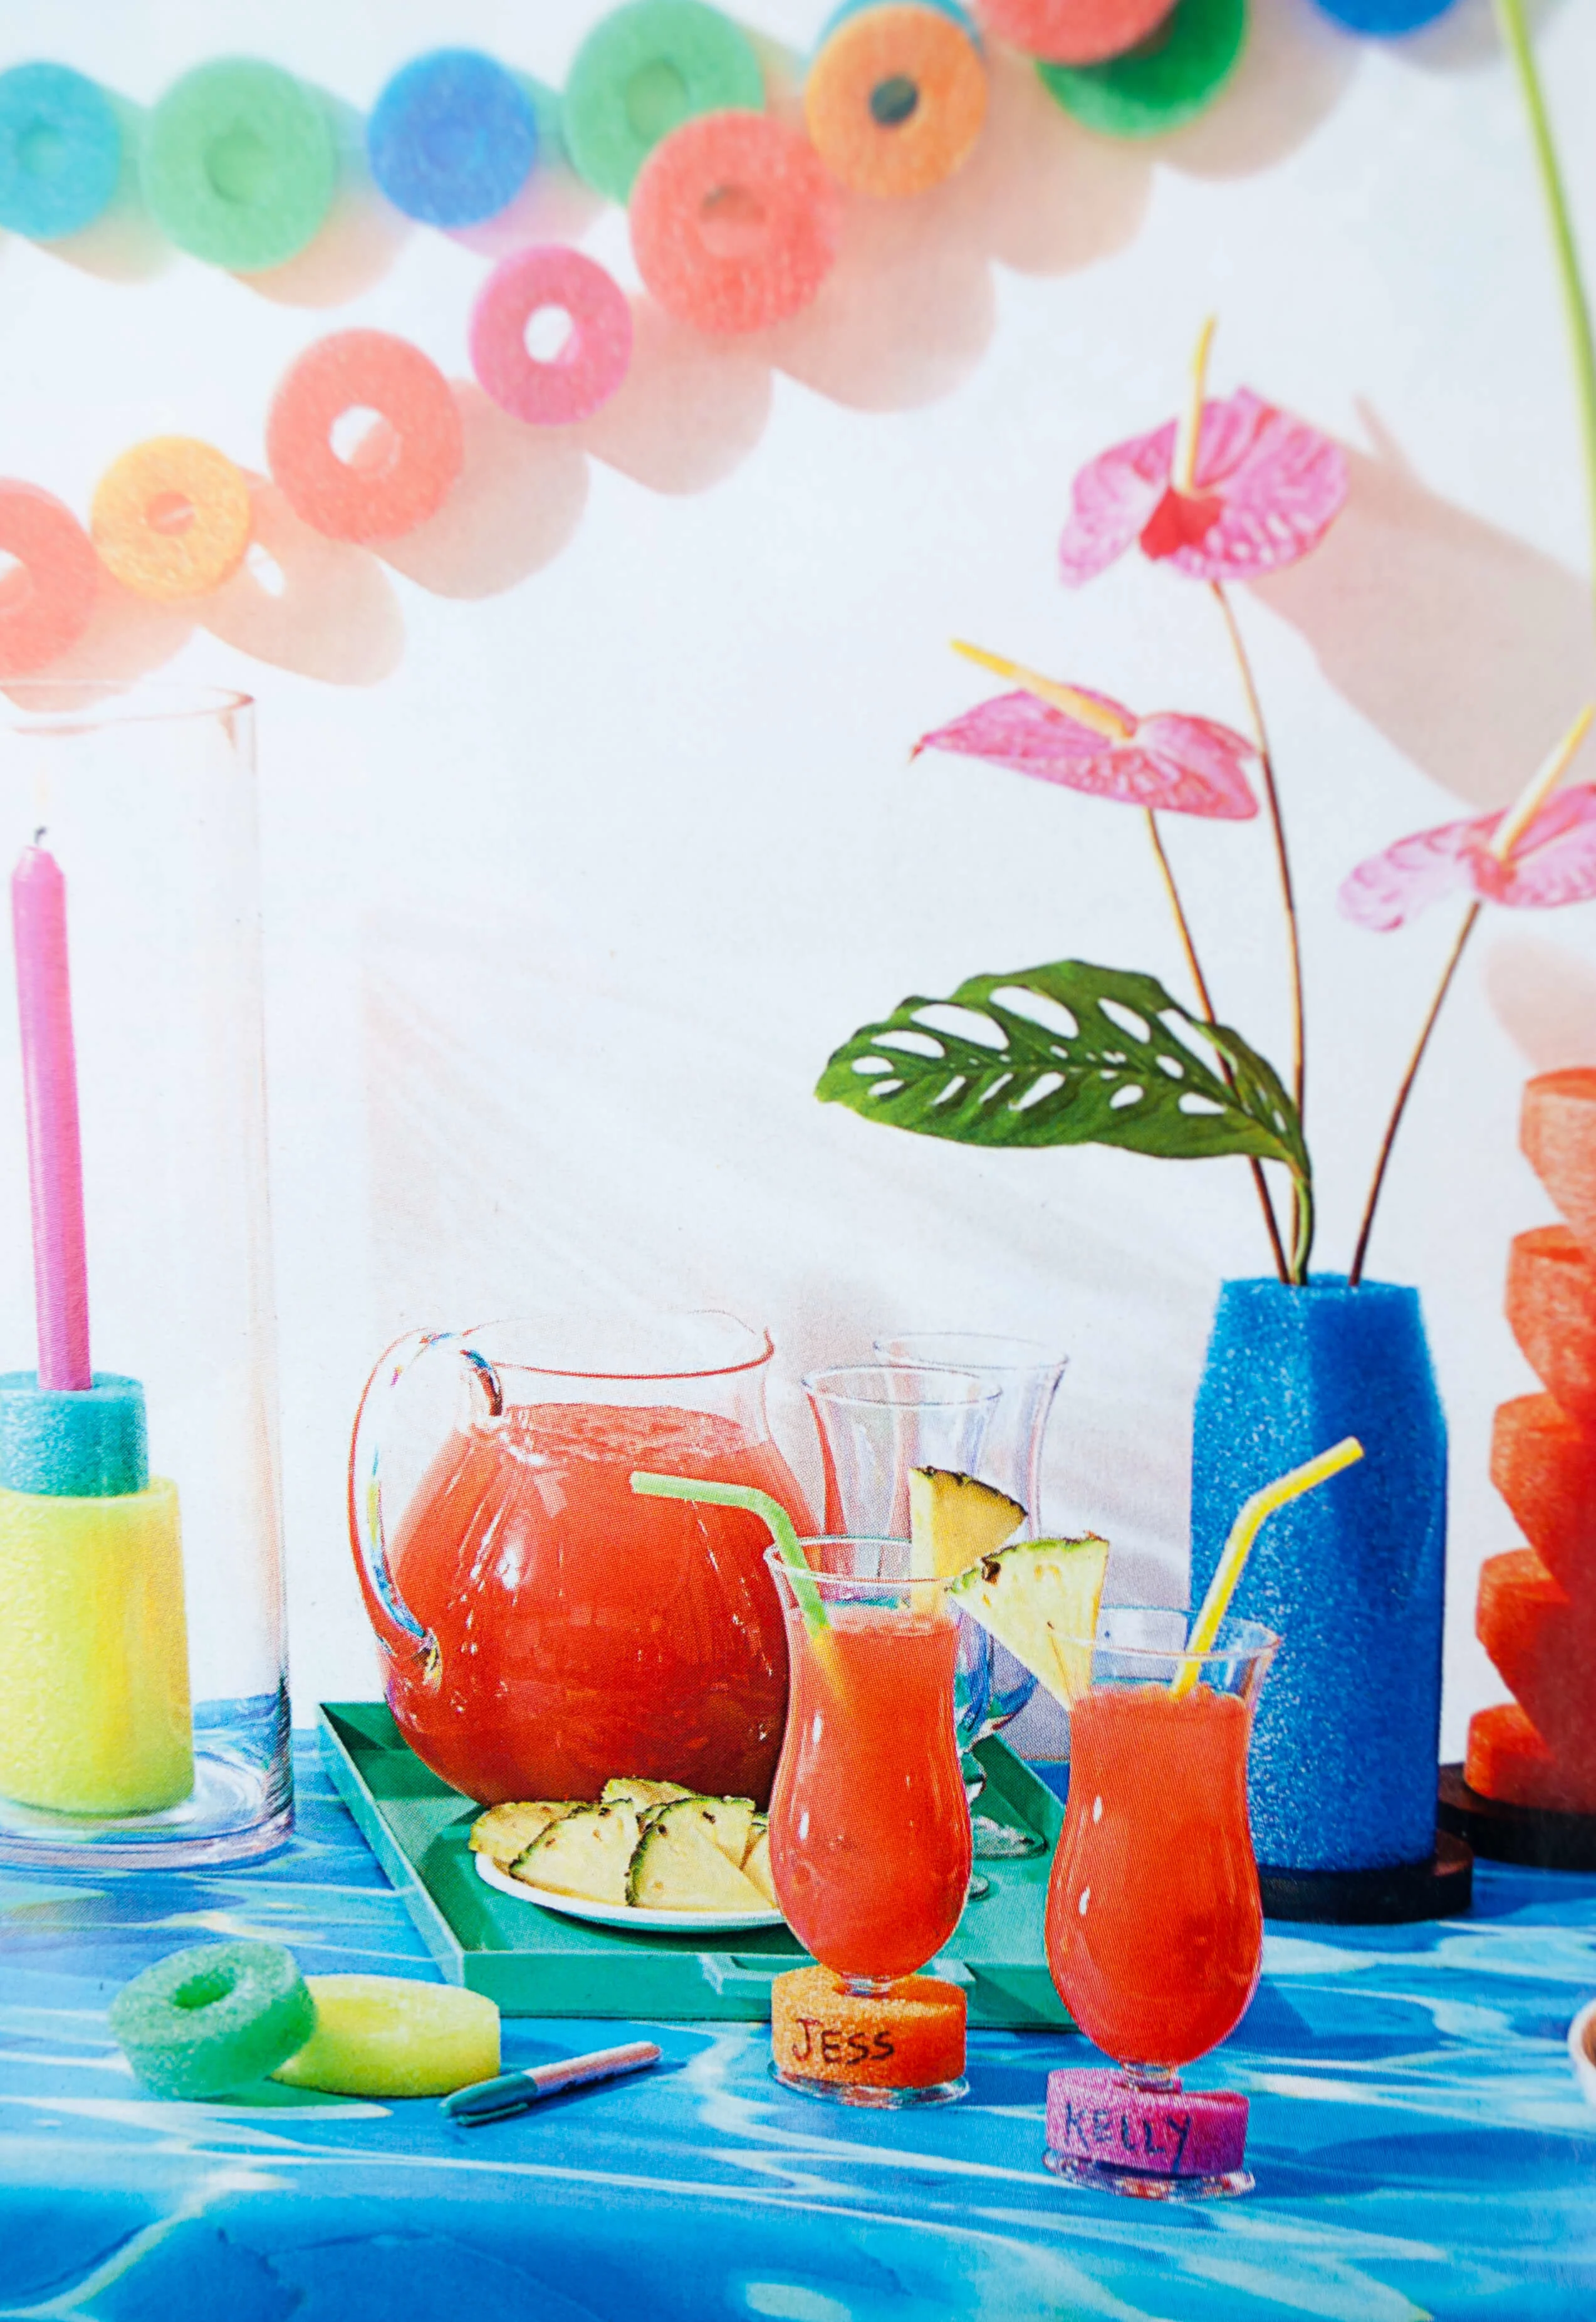 Pool Noodle Party Decorations featured in Rachael Ray Magazine